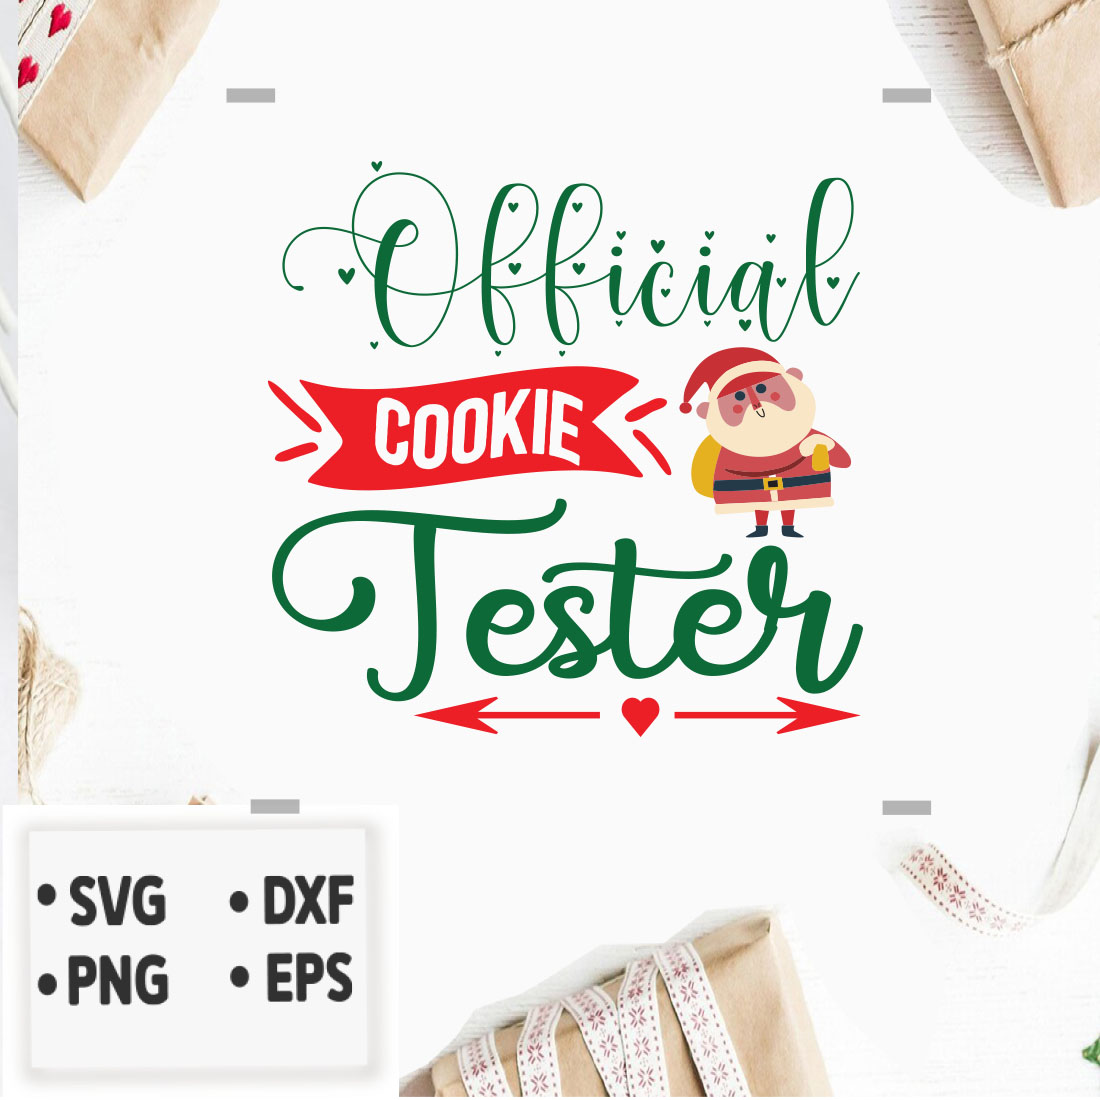 Image with unique prints Official cookie tester.